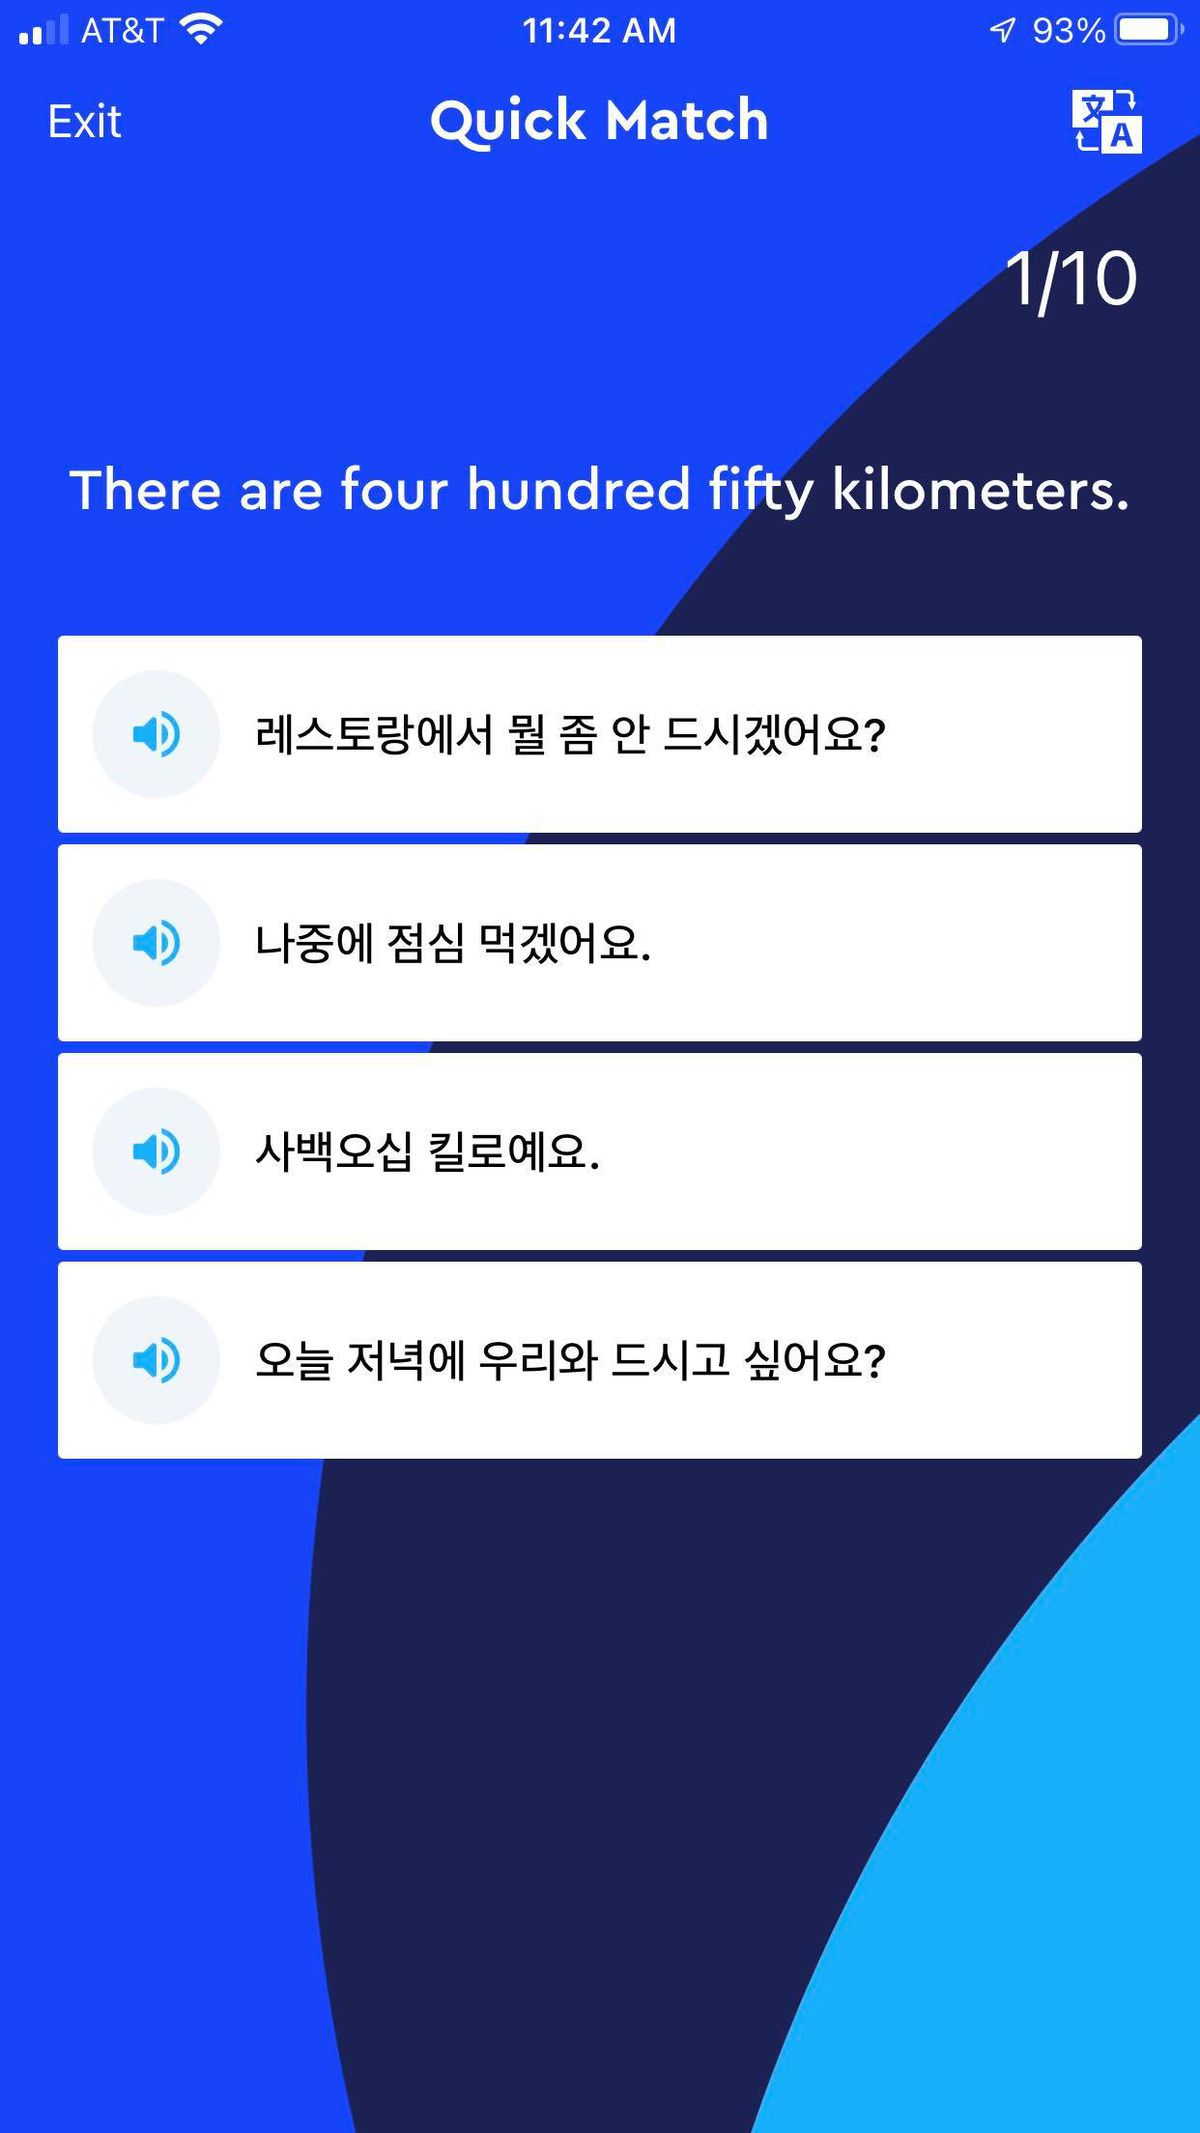 A screenshot of the Quick Match exercise in the Pimsleur app. The English phrase reads “There are four hundred fifty kilometers” with four Hangul options below.